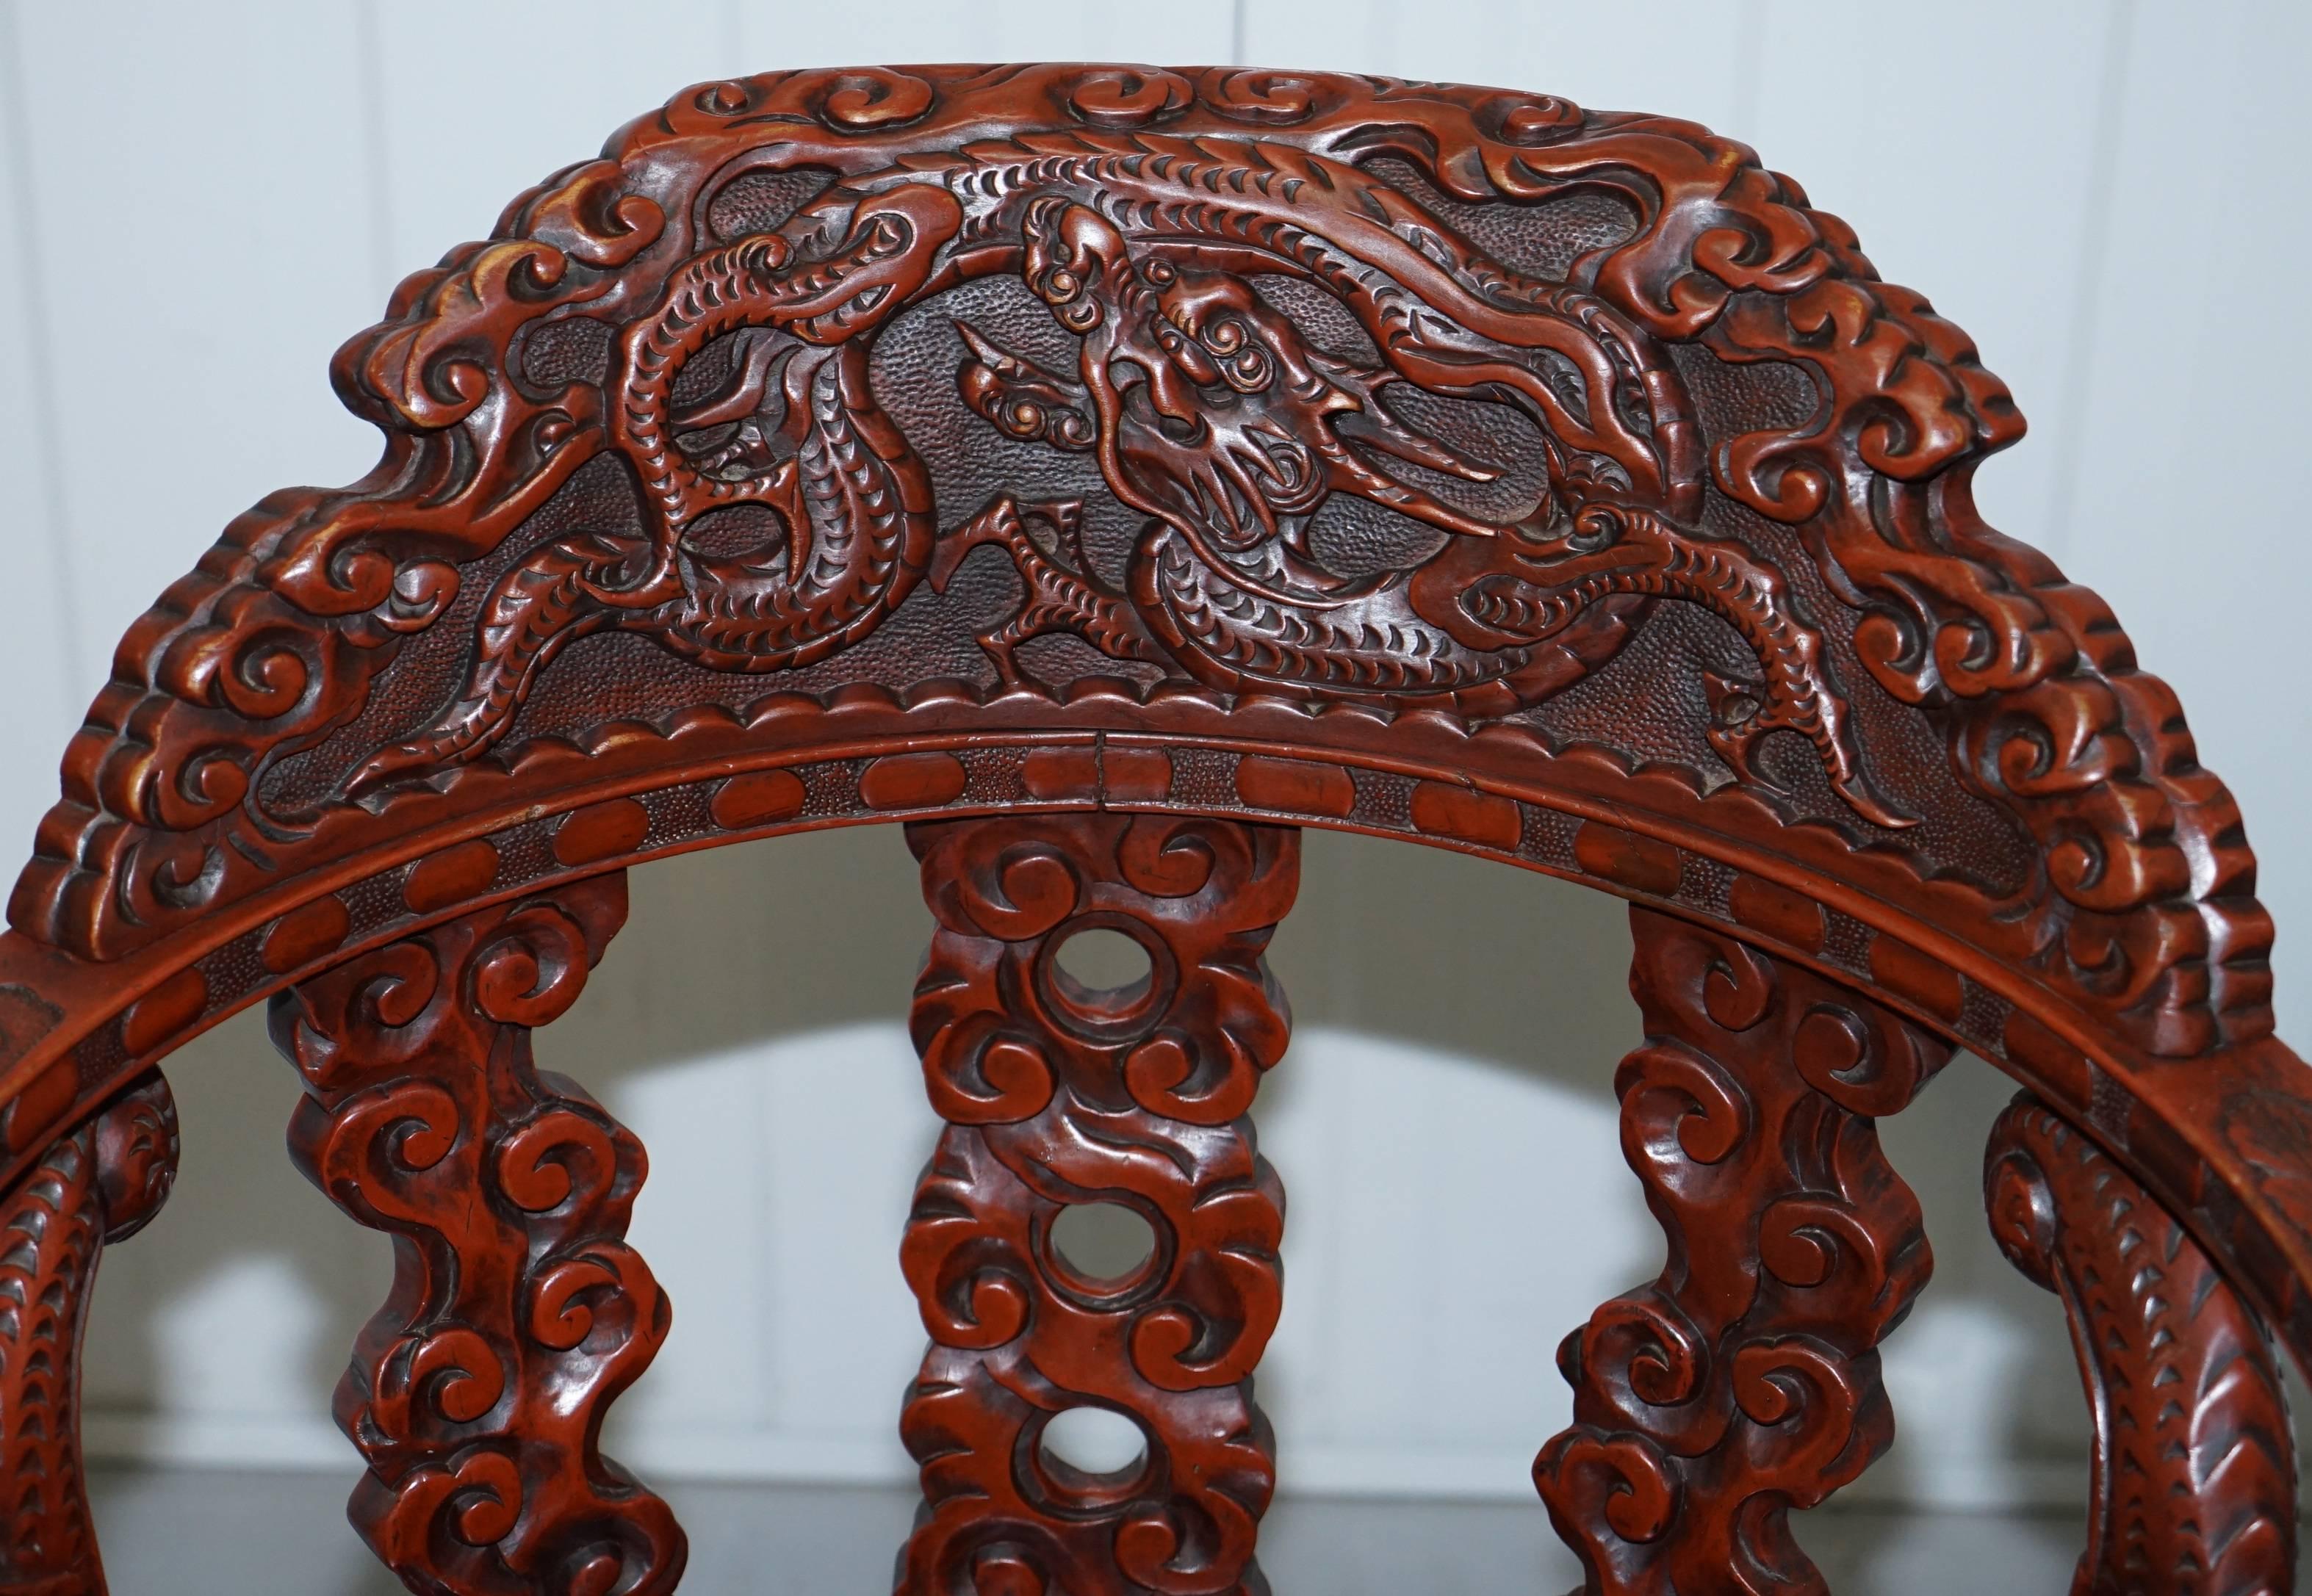 Chinese Export Chinese Qing Dynasty Carved Redwood Dragon and Lion Foo Dogs Armchair circa 1870